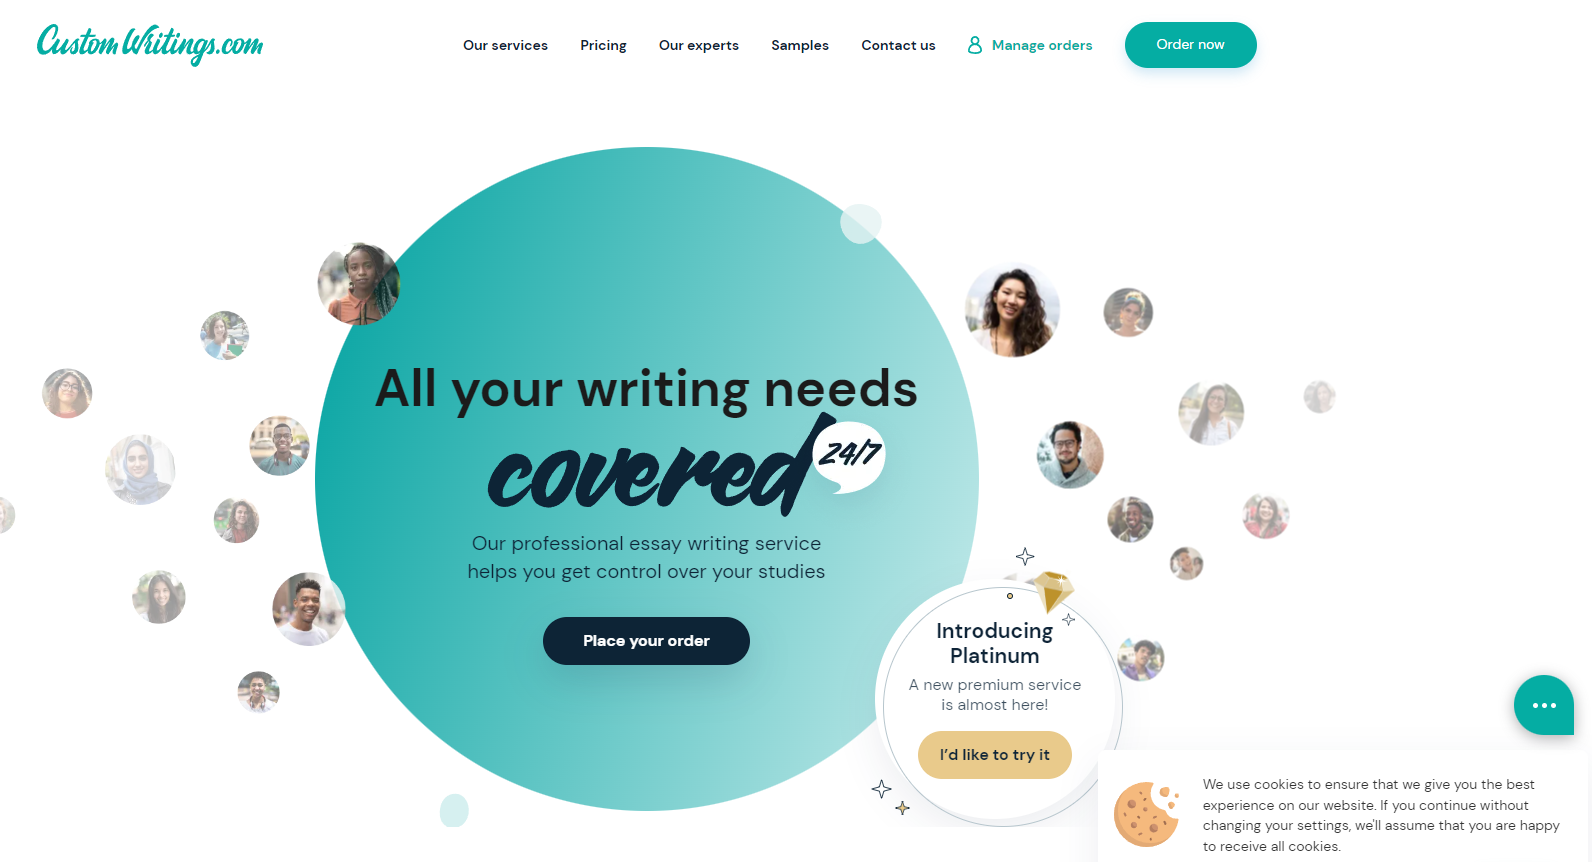 CustomWritings.com: timely assistance with any college paper